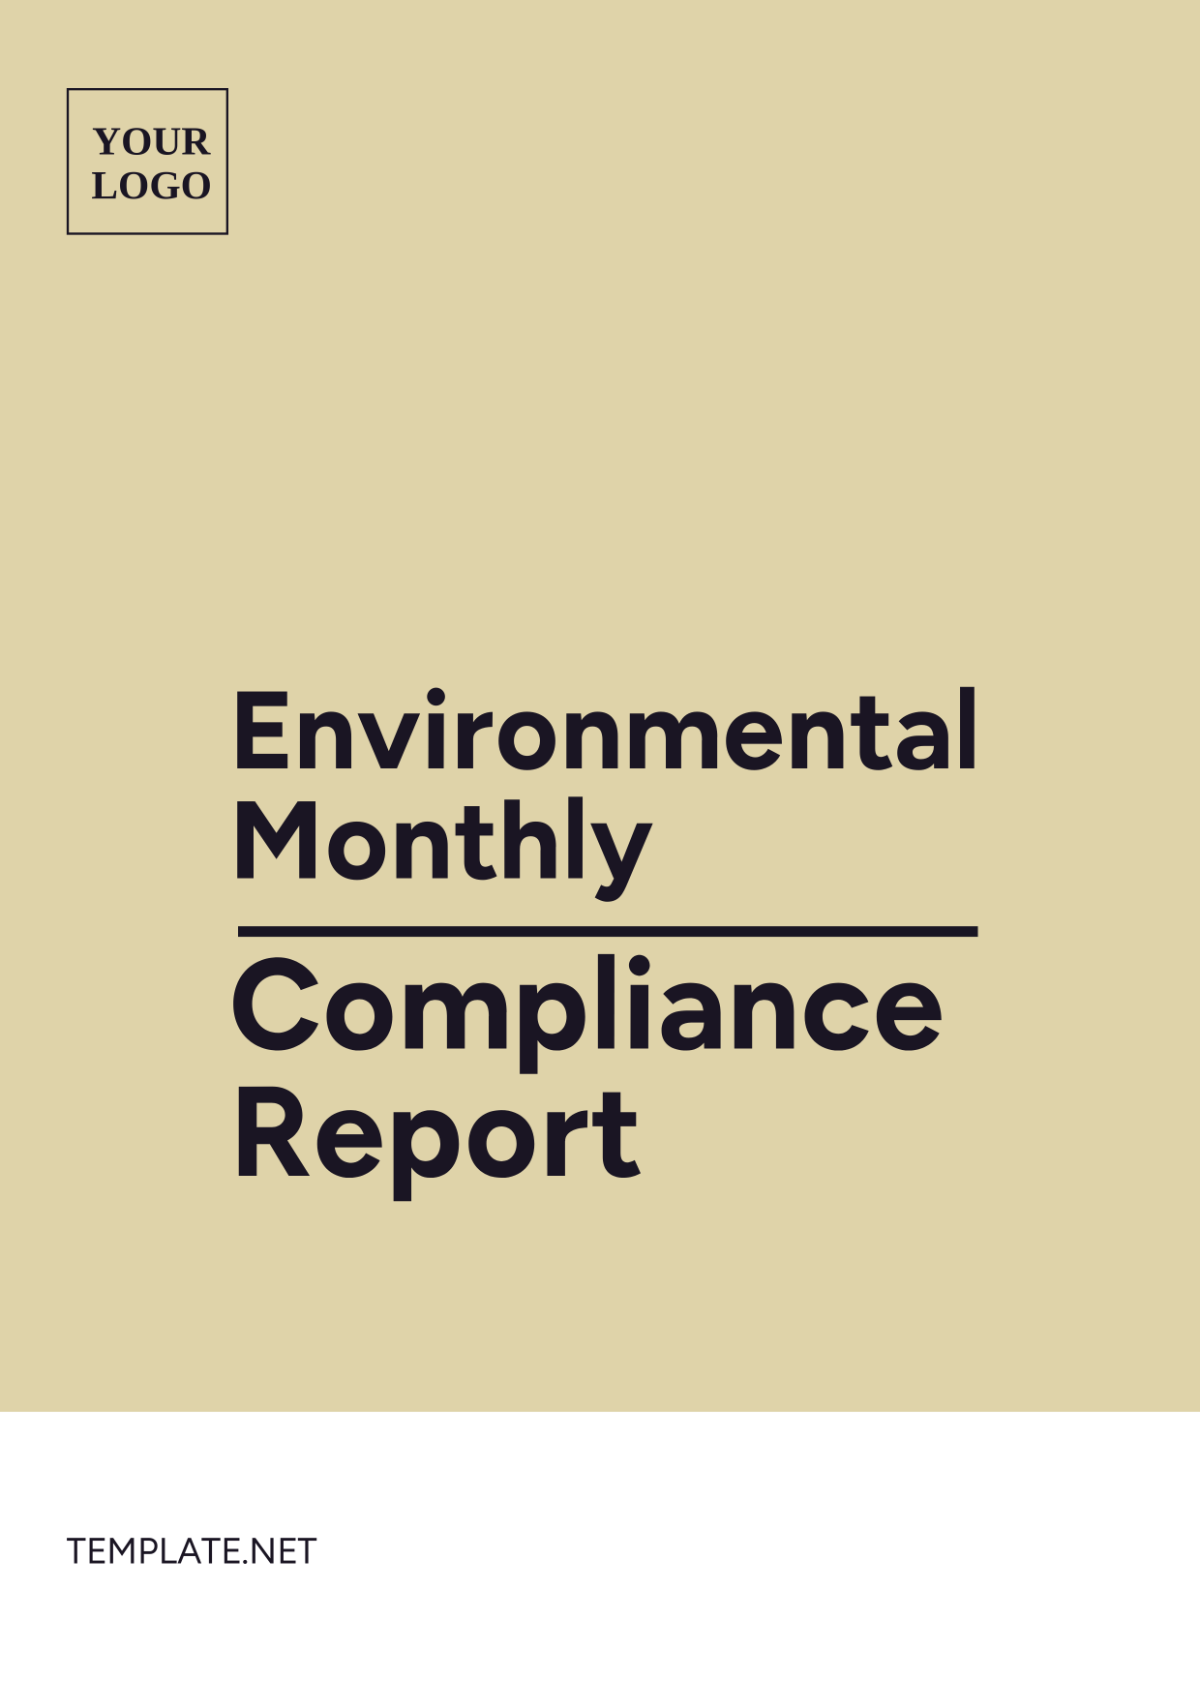 Environmental Monthly Compliance Report Template